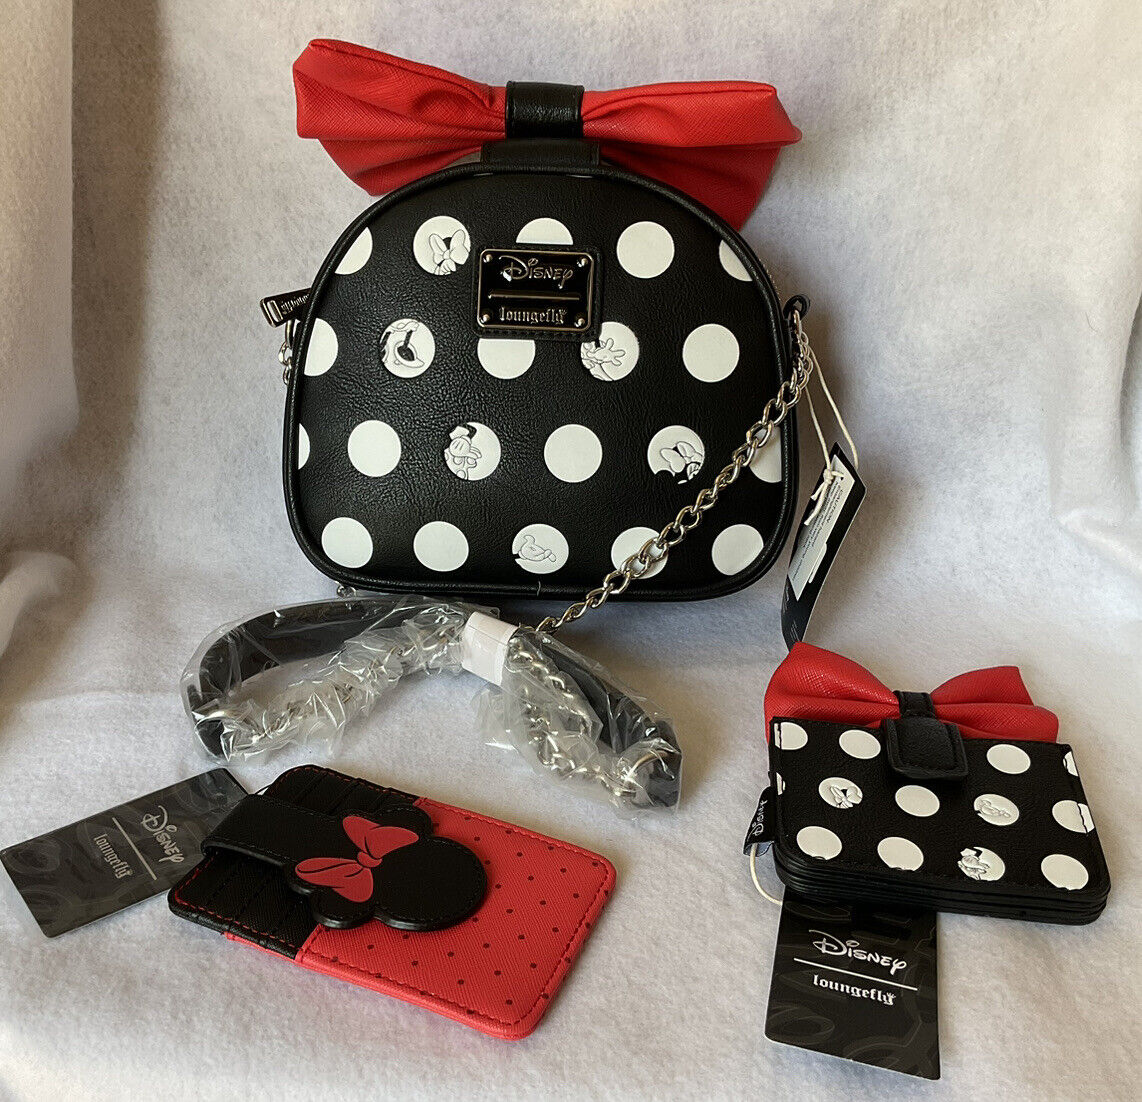 Disney Loungefly Minnie Mouse Crossbody Bag W Accessories Polka Dot Red Bow New